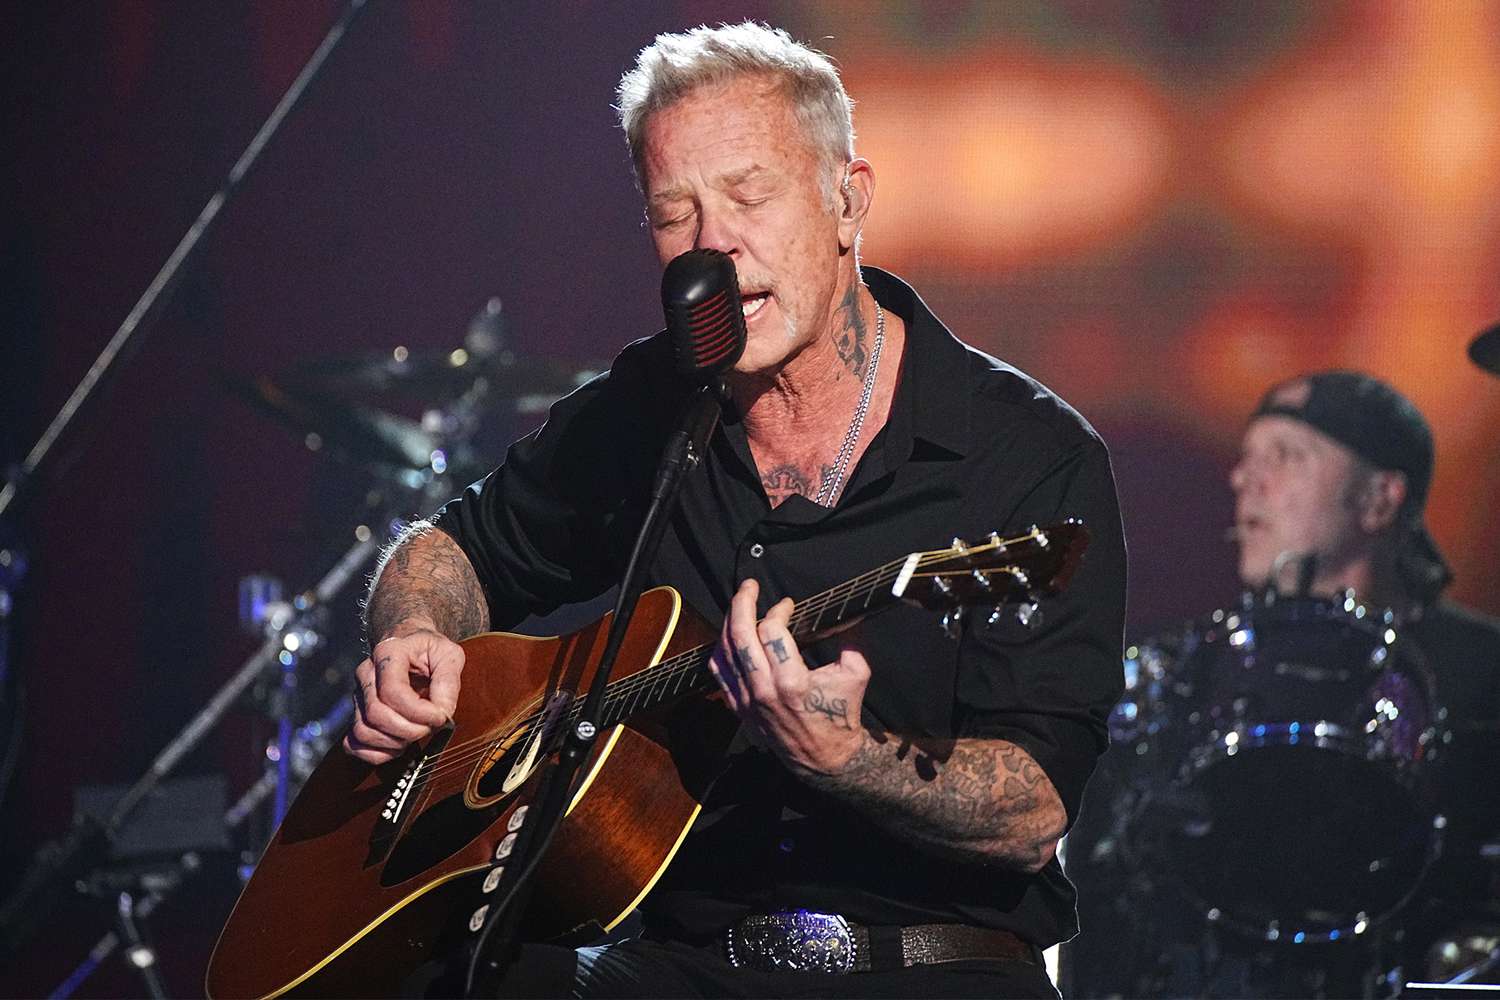 James Hetfield of Metallica performs onstage as Metallica Presents: The Helping Hands Concert (Paramount+) at Microsoft Theater on December 16, 2022 in Los Angeles, California.